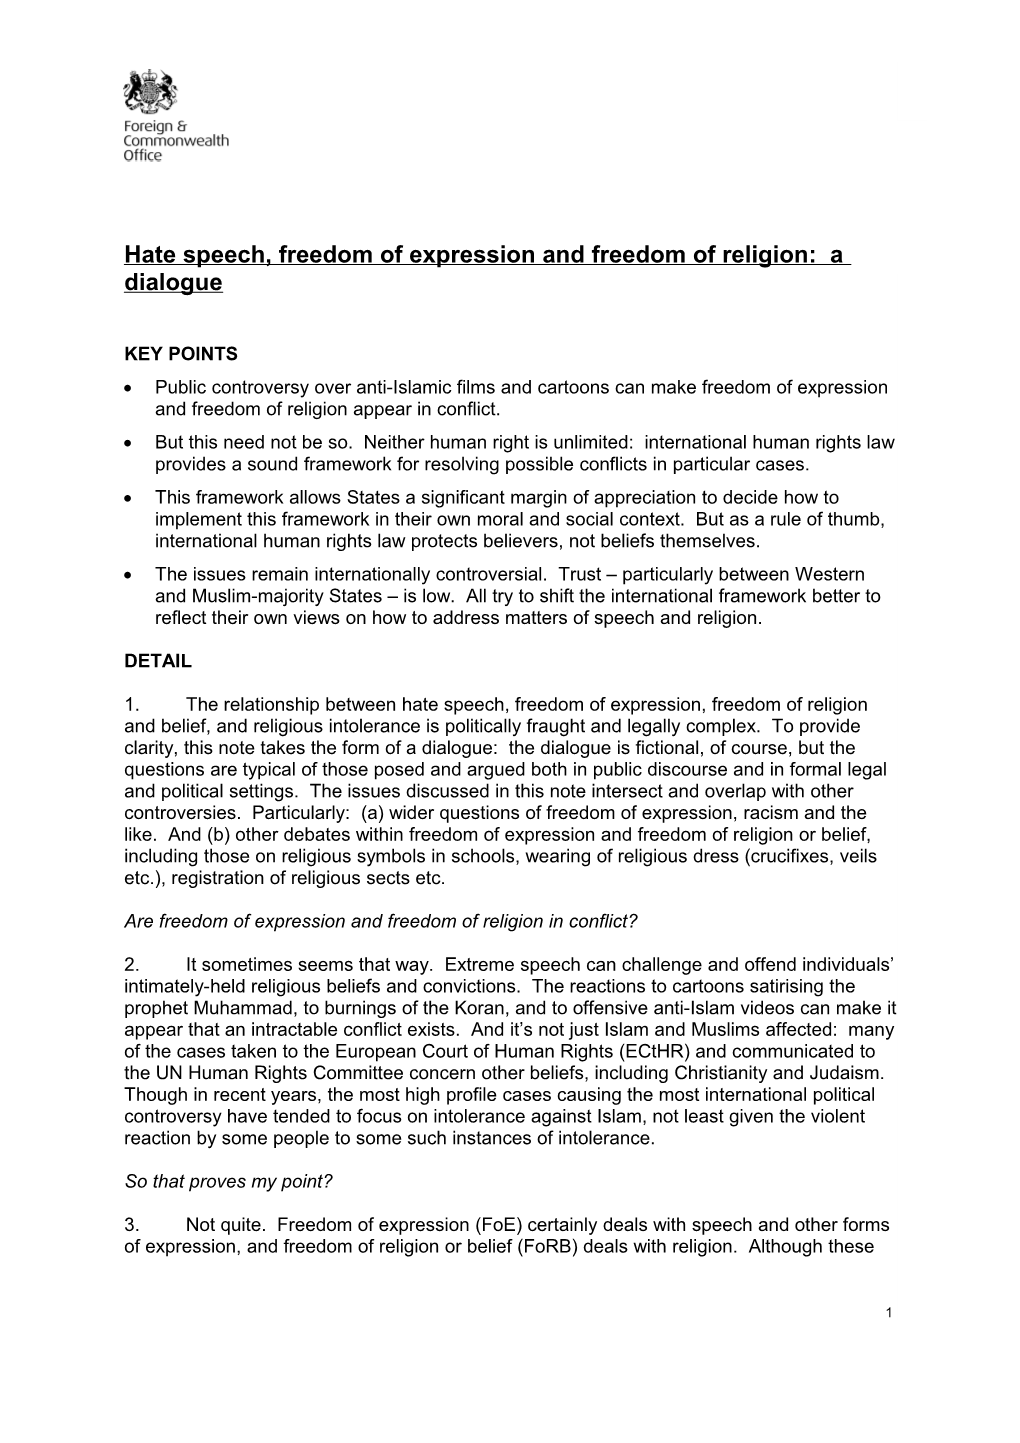 Hate Speech, Freedom of Expression and Freedom of Religion